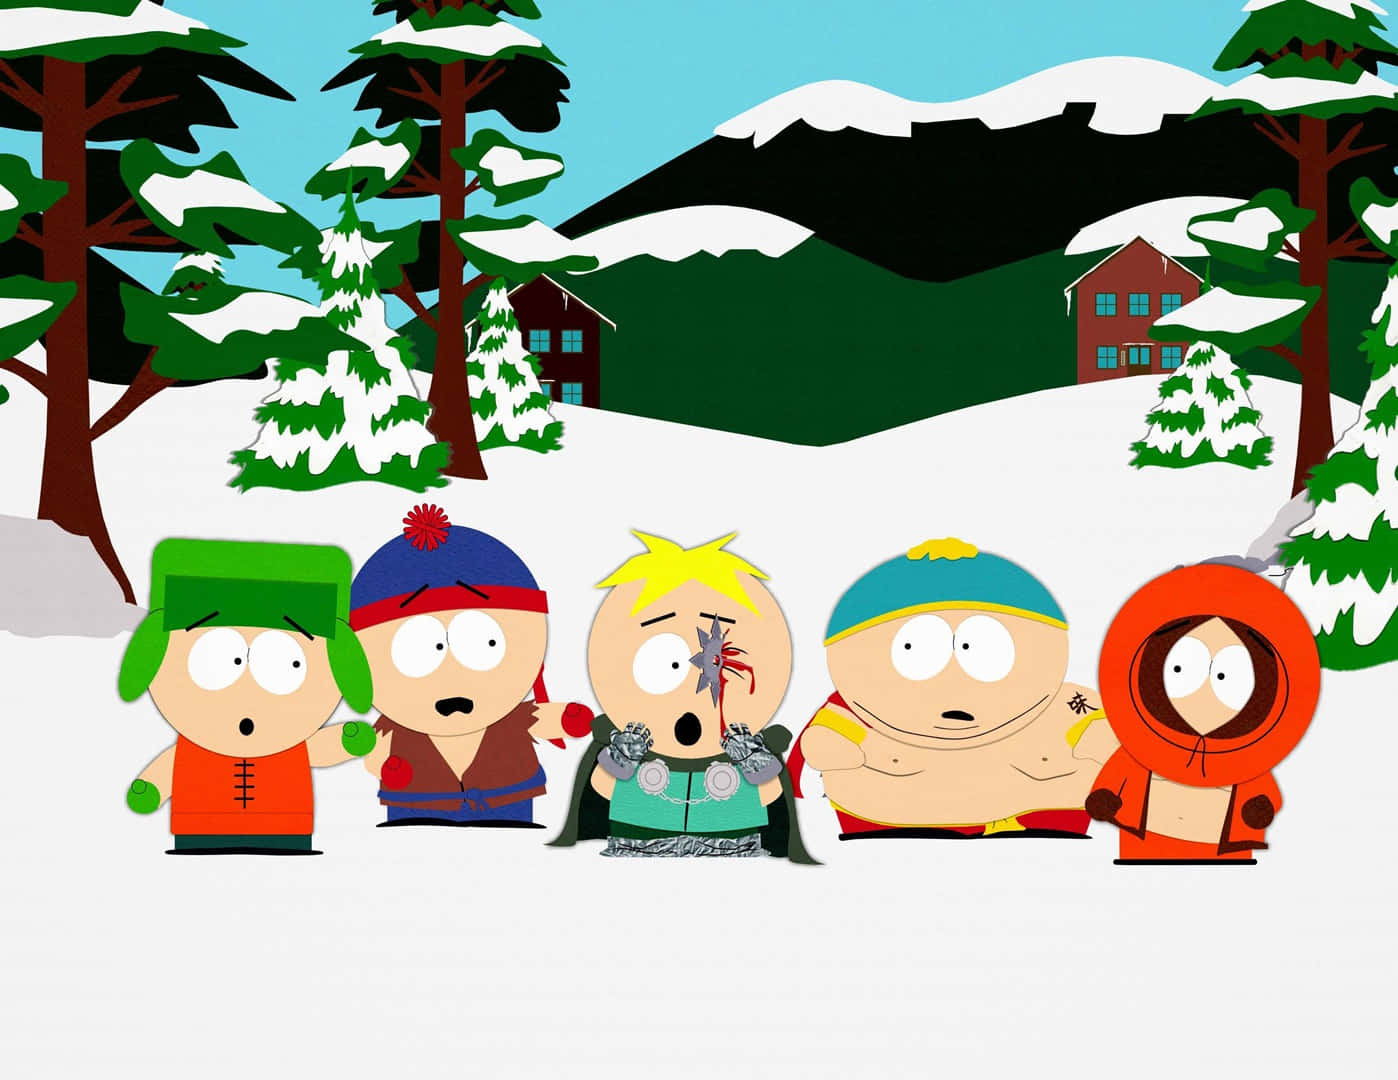 Imágenesde South Park